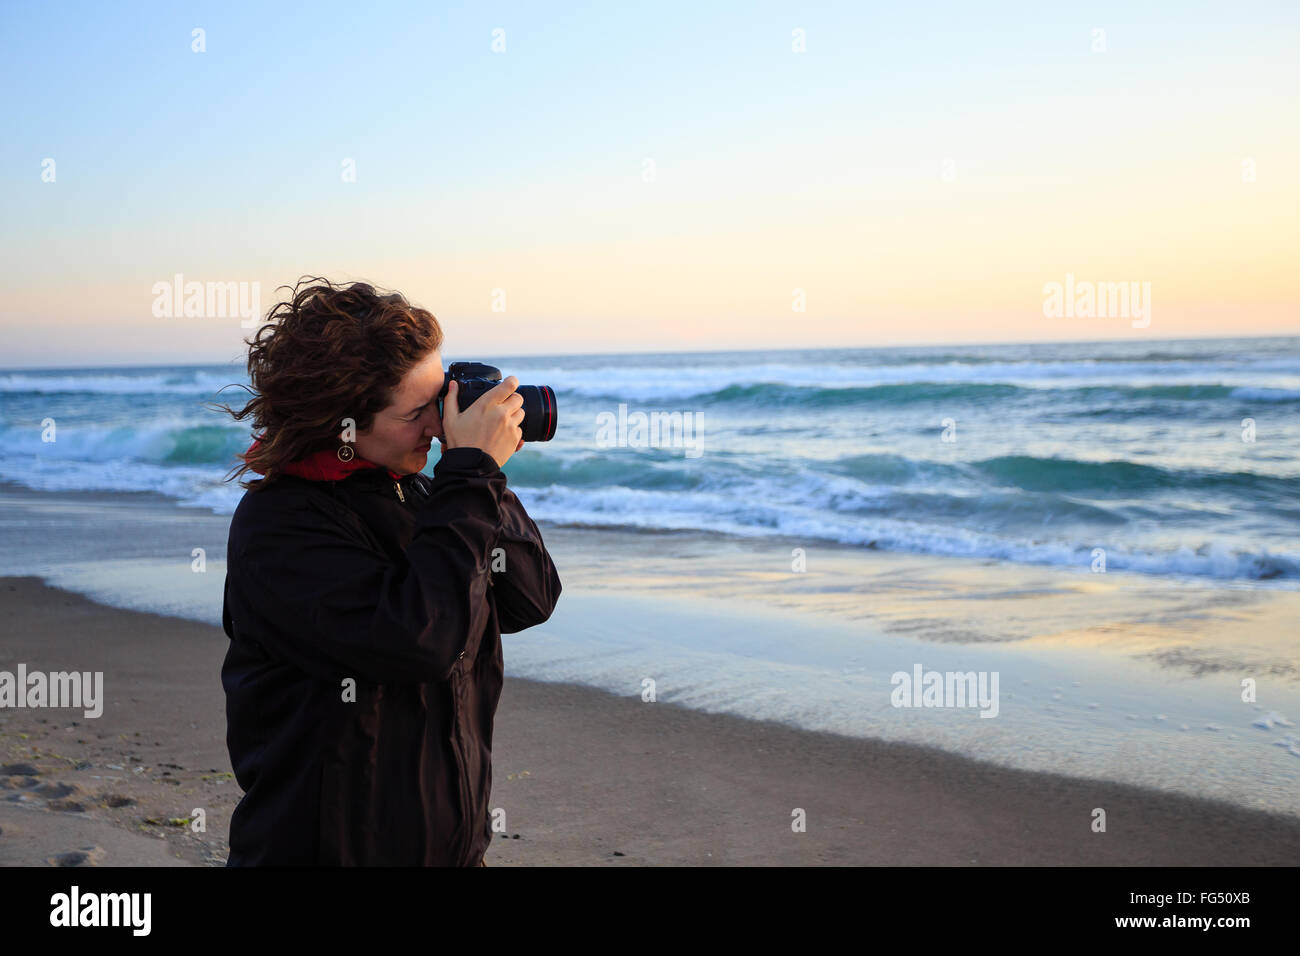 Sunset photos being shot by a woman with a camera on the beach at dusk. Stock Photo